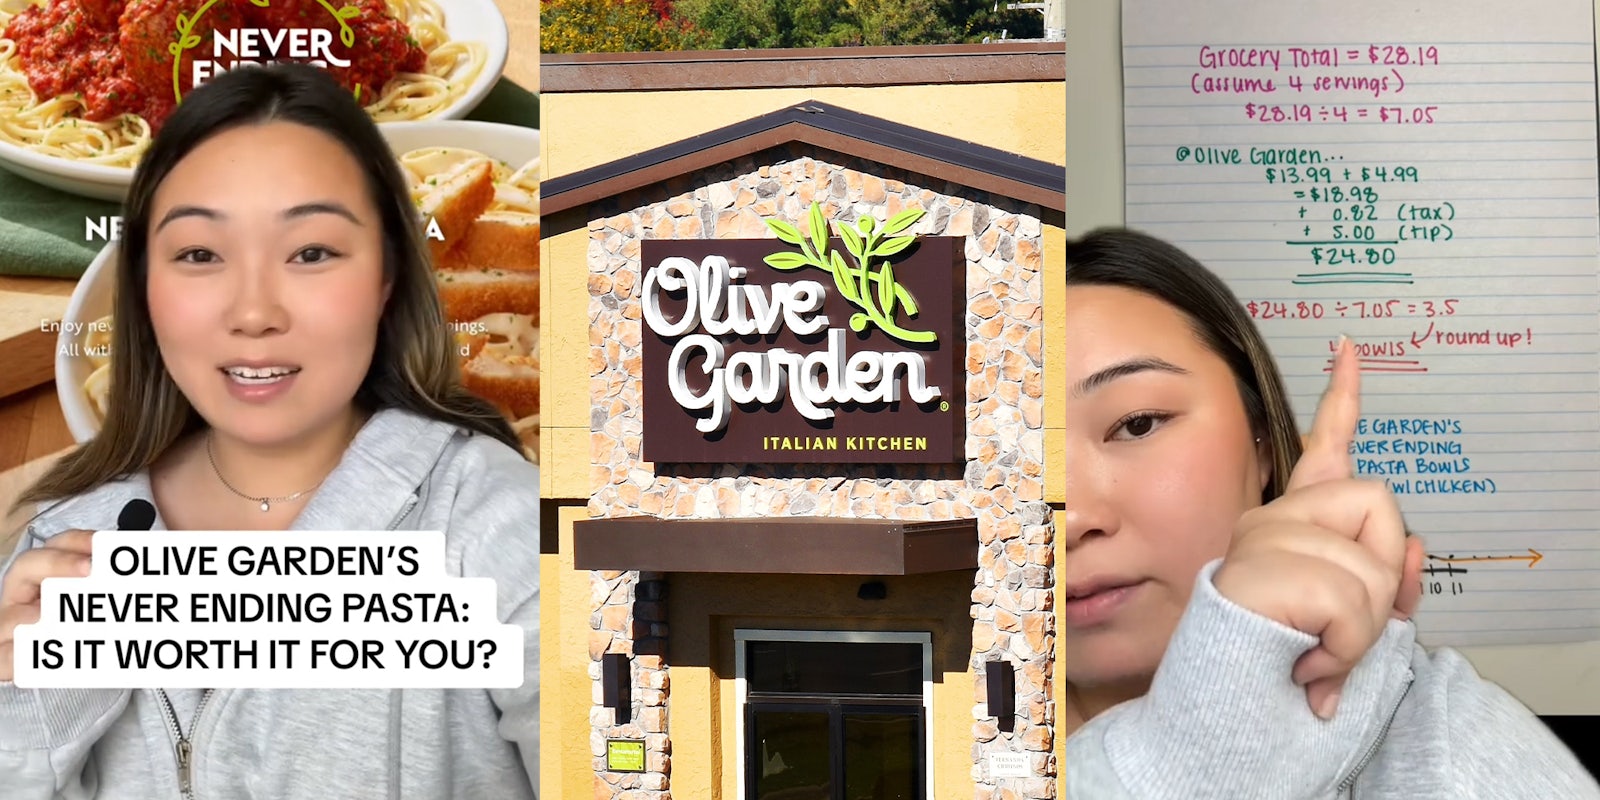 Woman calculates how much pasta you have to eat in order for Olive Garden’s never-ending deal to be worth it